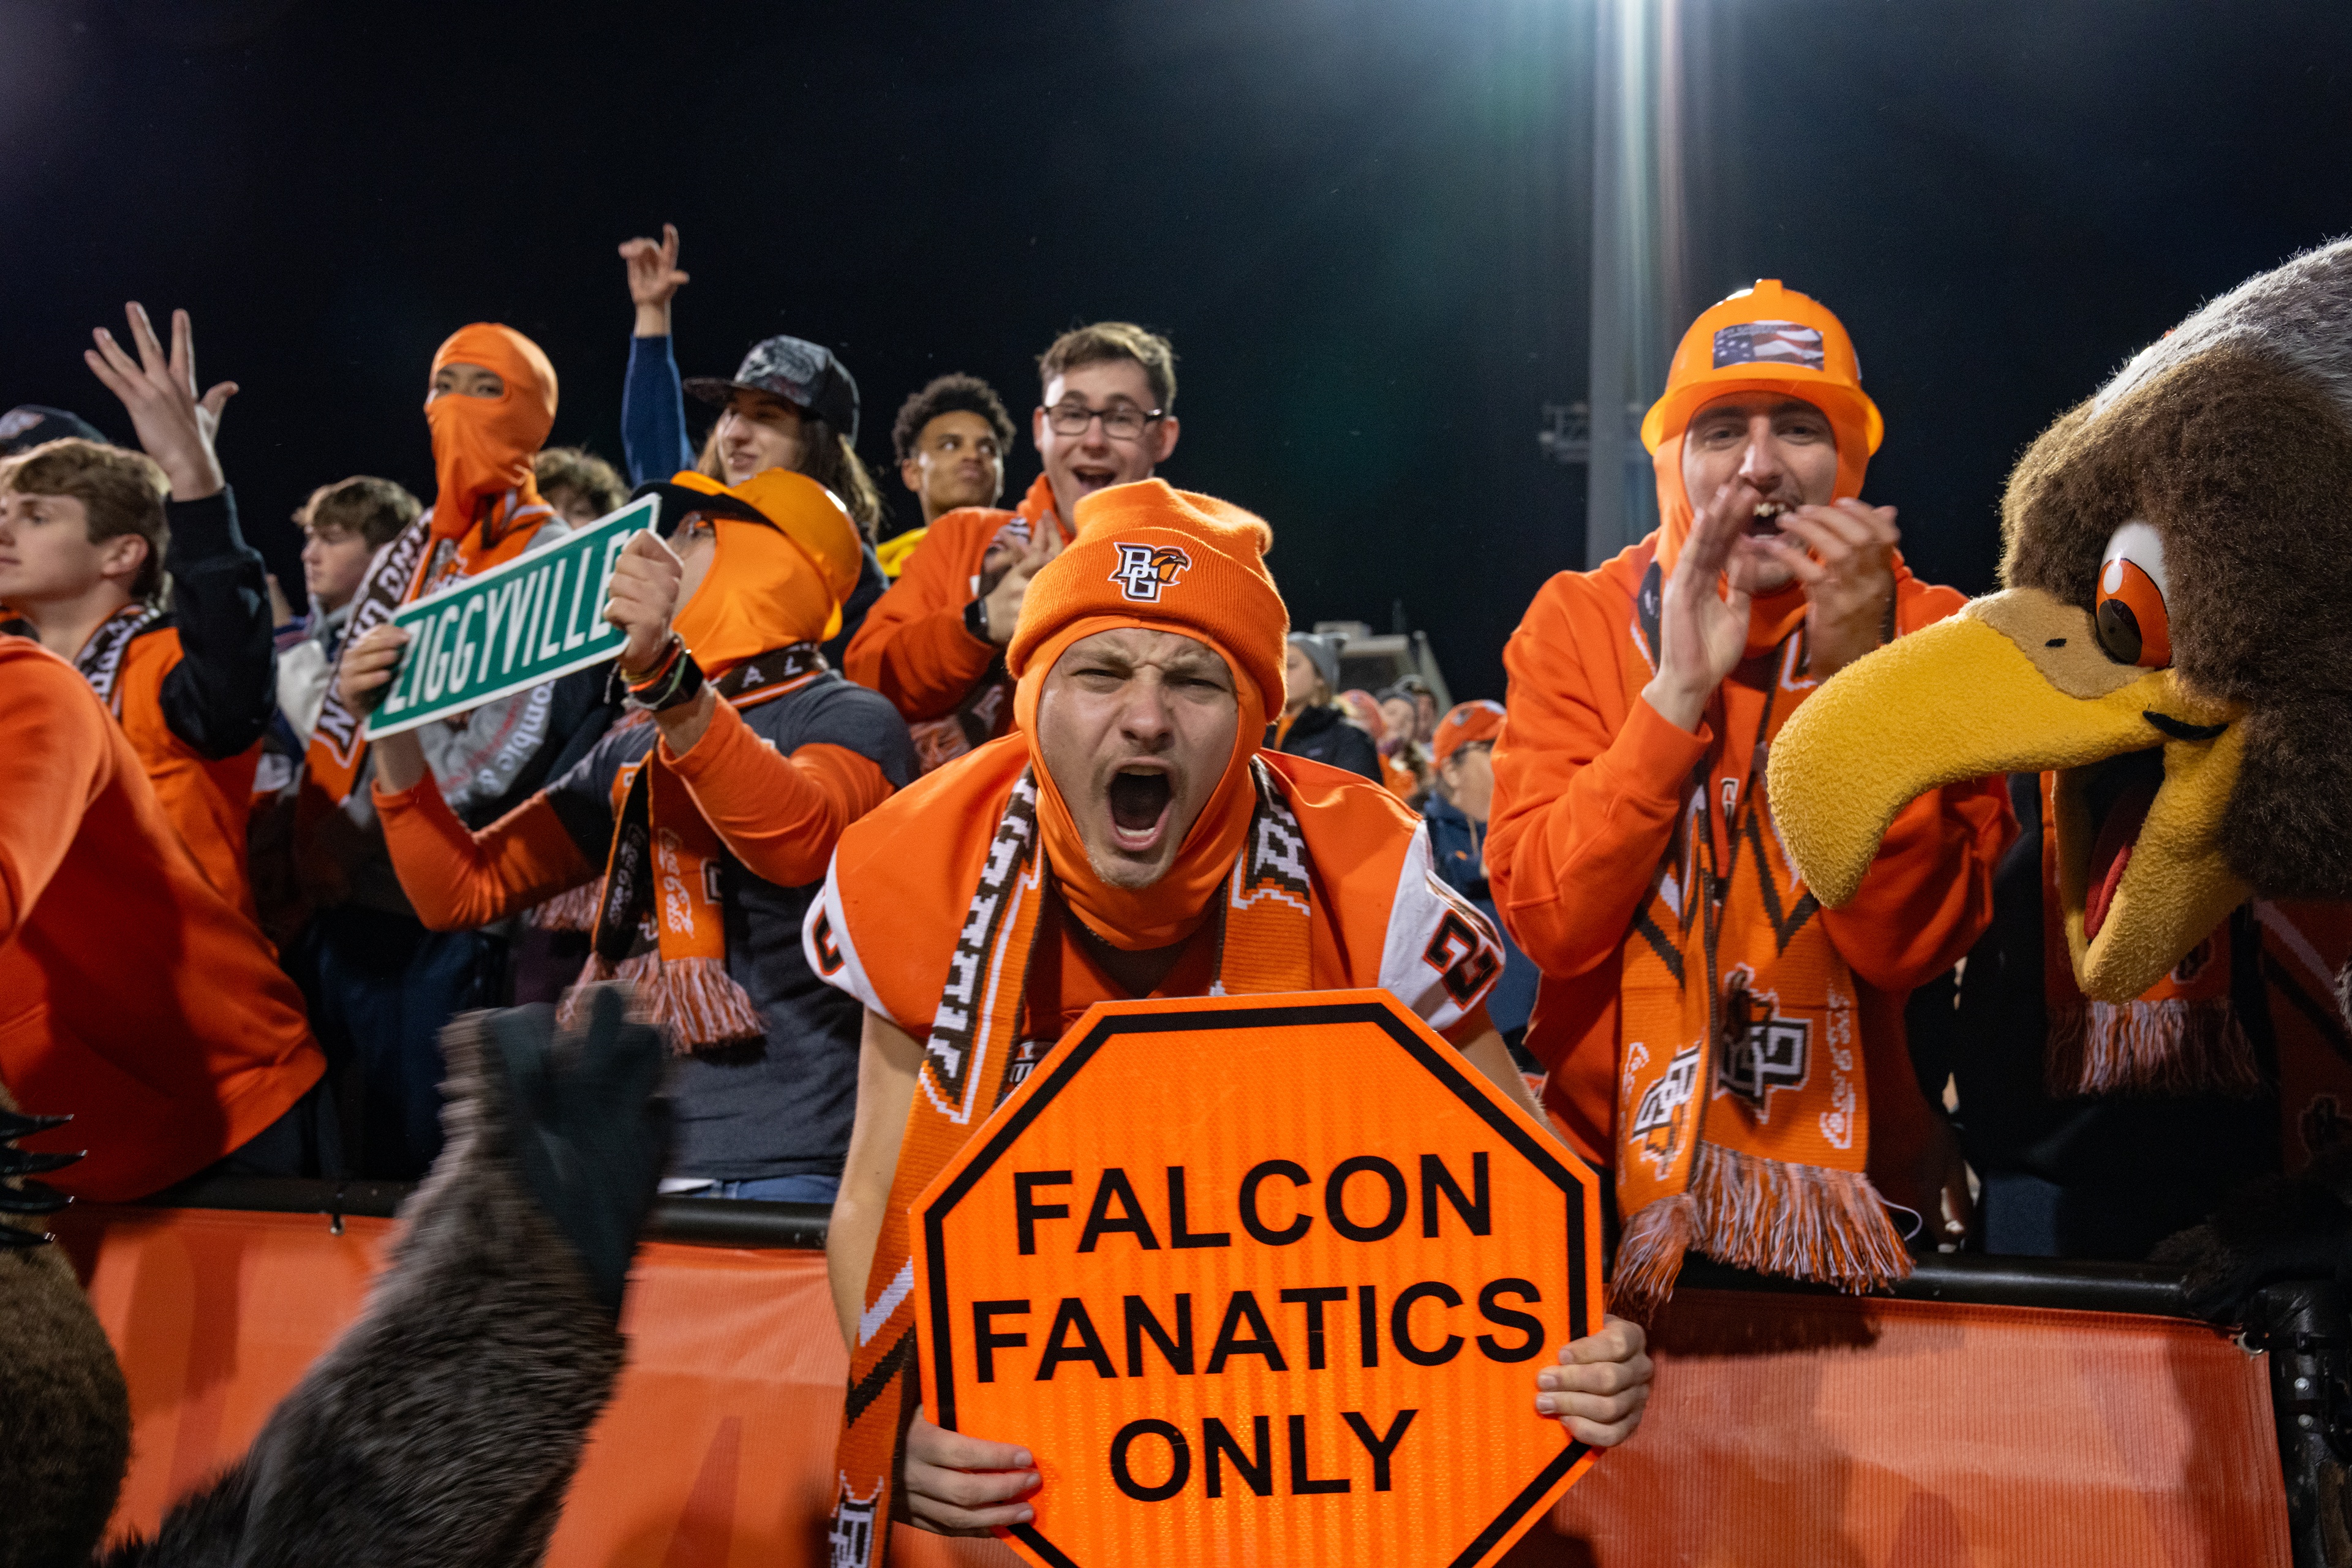 BGSU Falcons football fans cheer in the stands